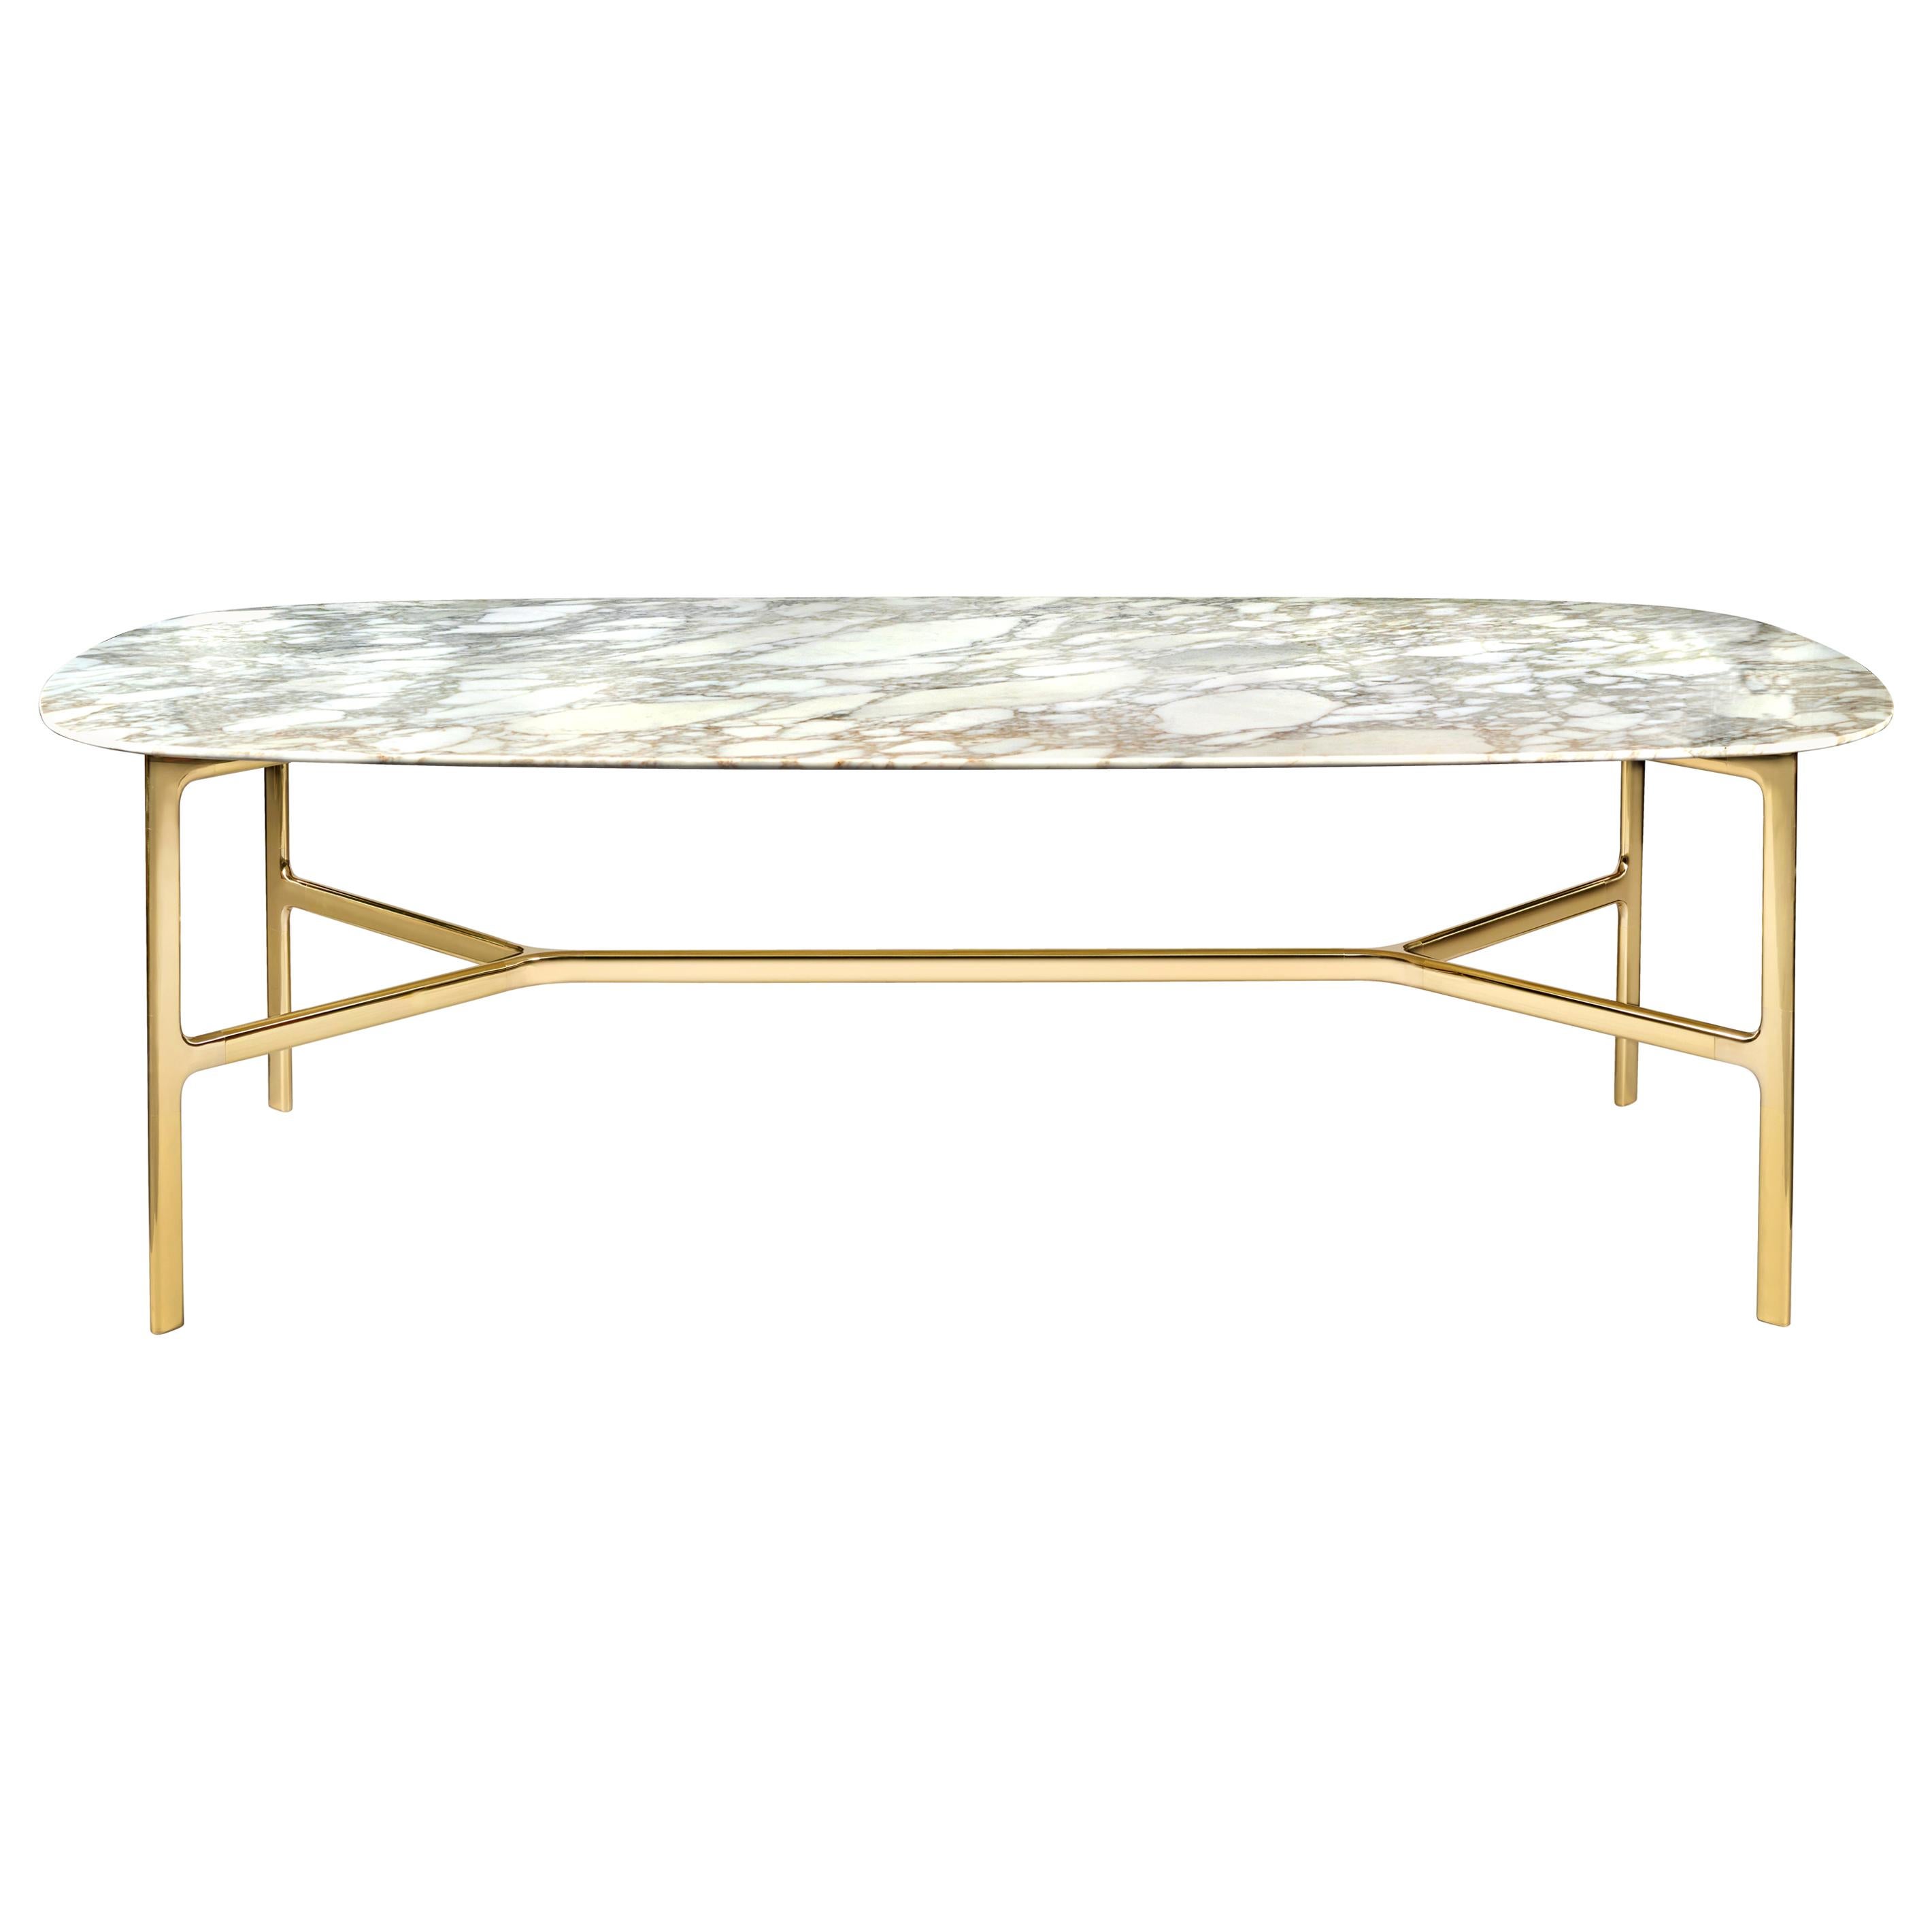 Coast Dining Table in Calacatta Gold Marble Top with Polished Brass Legs, Branch